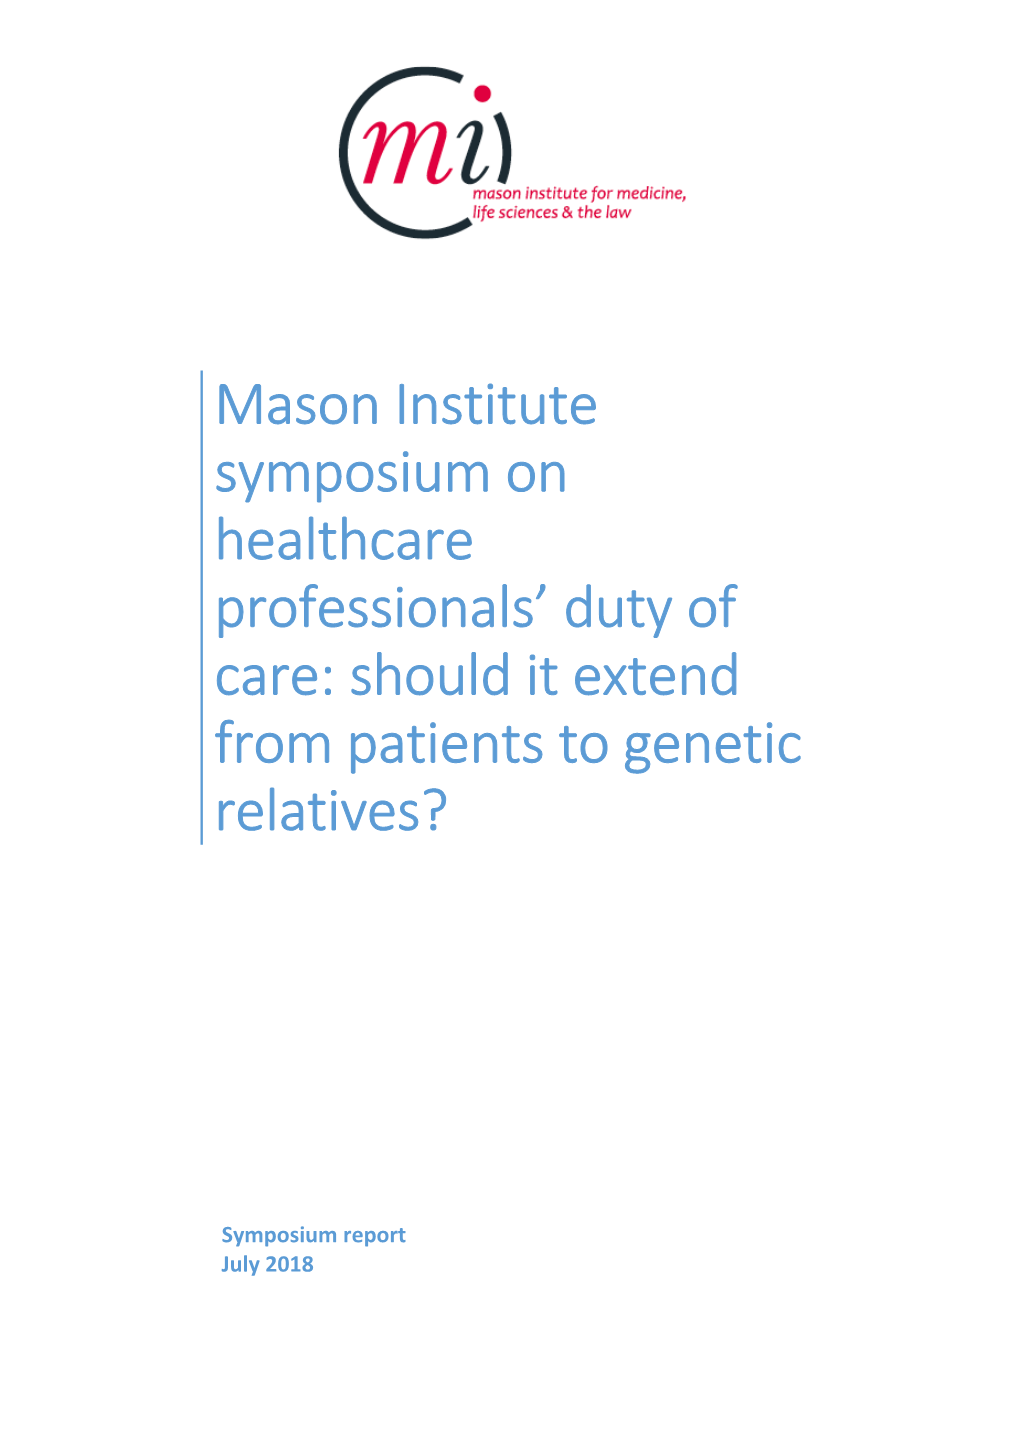 Mason Institute Symposium on Healthcare Professionals' Duty of Care: Should It Extend from Patients to Genetic Relatives?